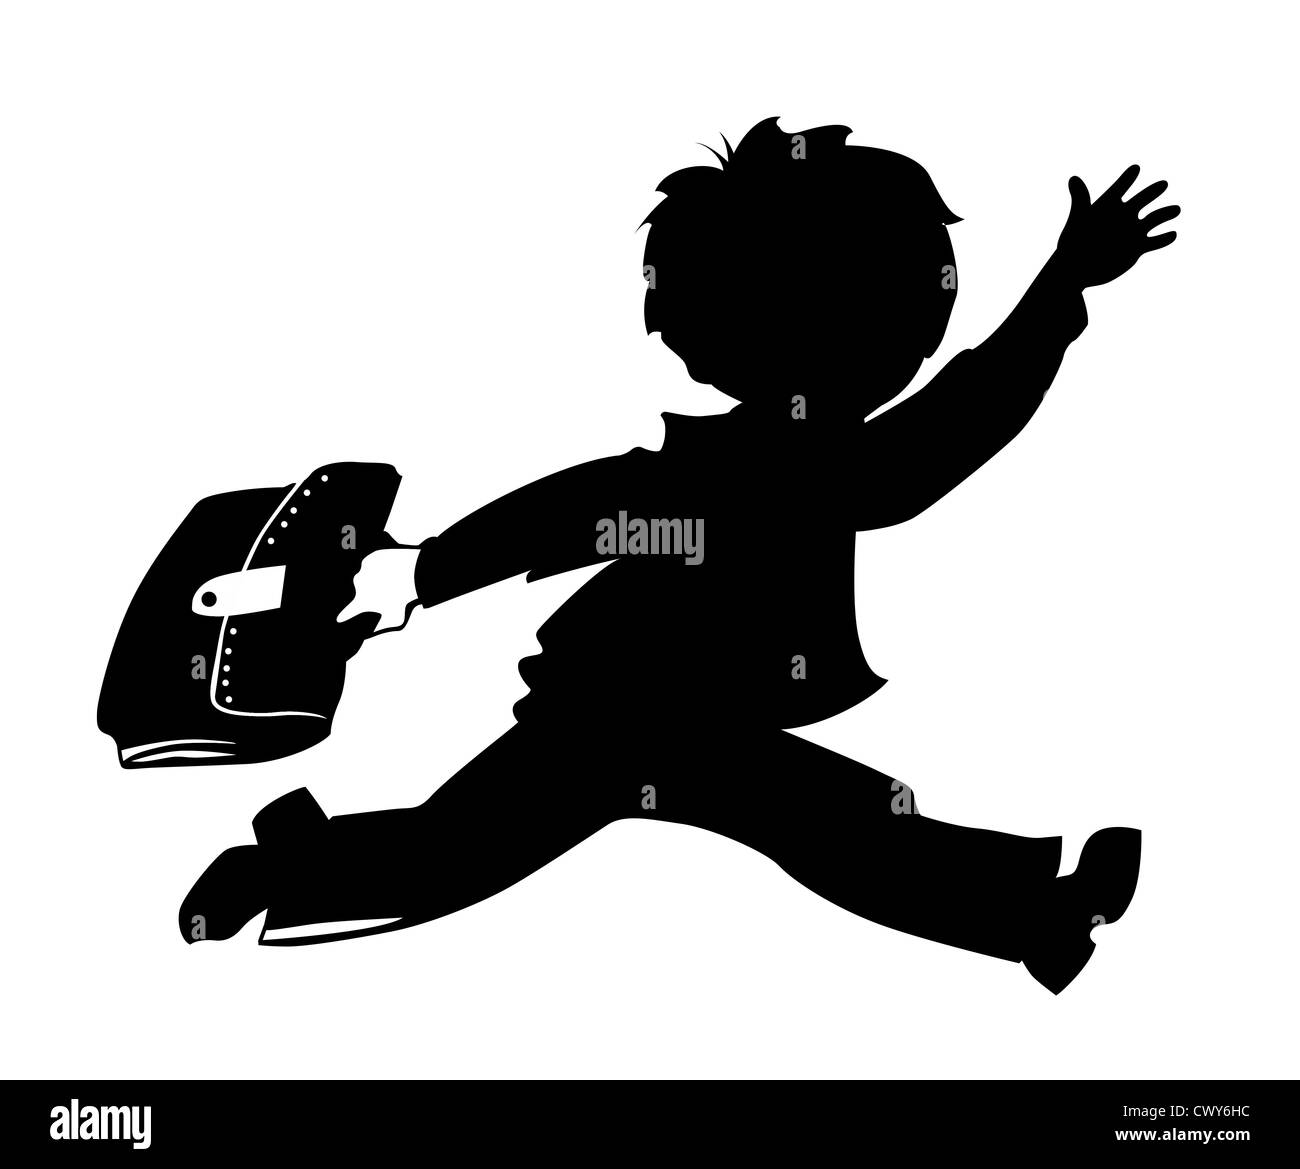 schoolboy silhouette on white background, vector illustration Stock Photo